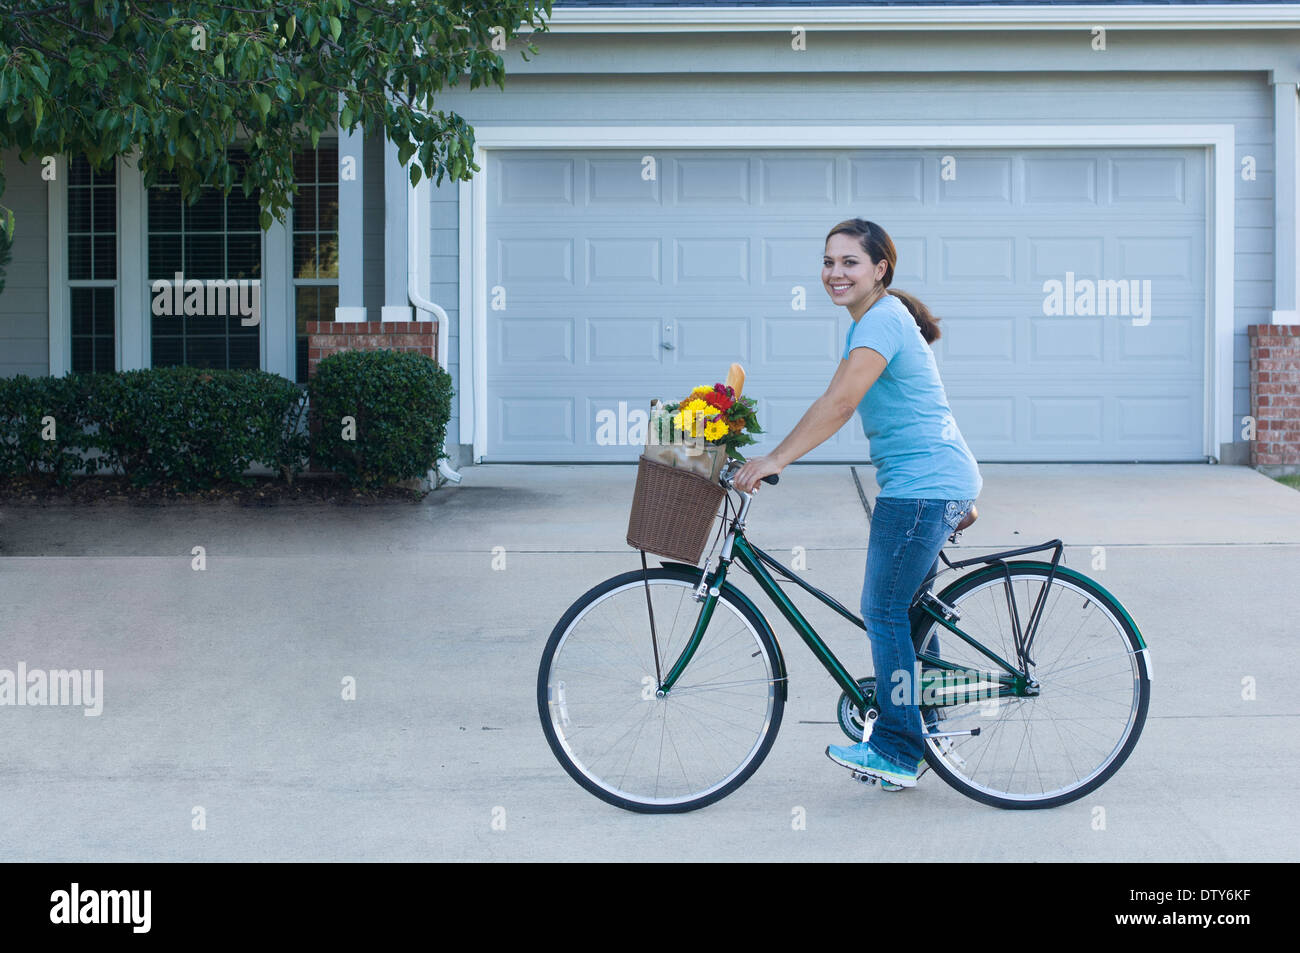 Mixed race woman riding bicycle in driveway Stock Photo